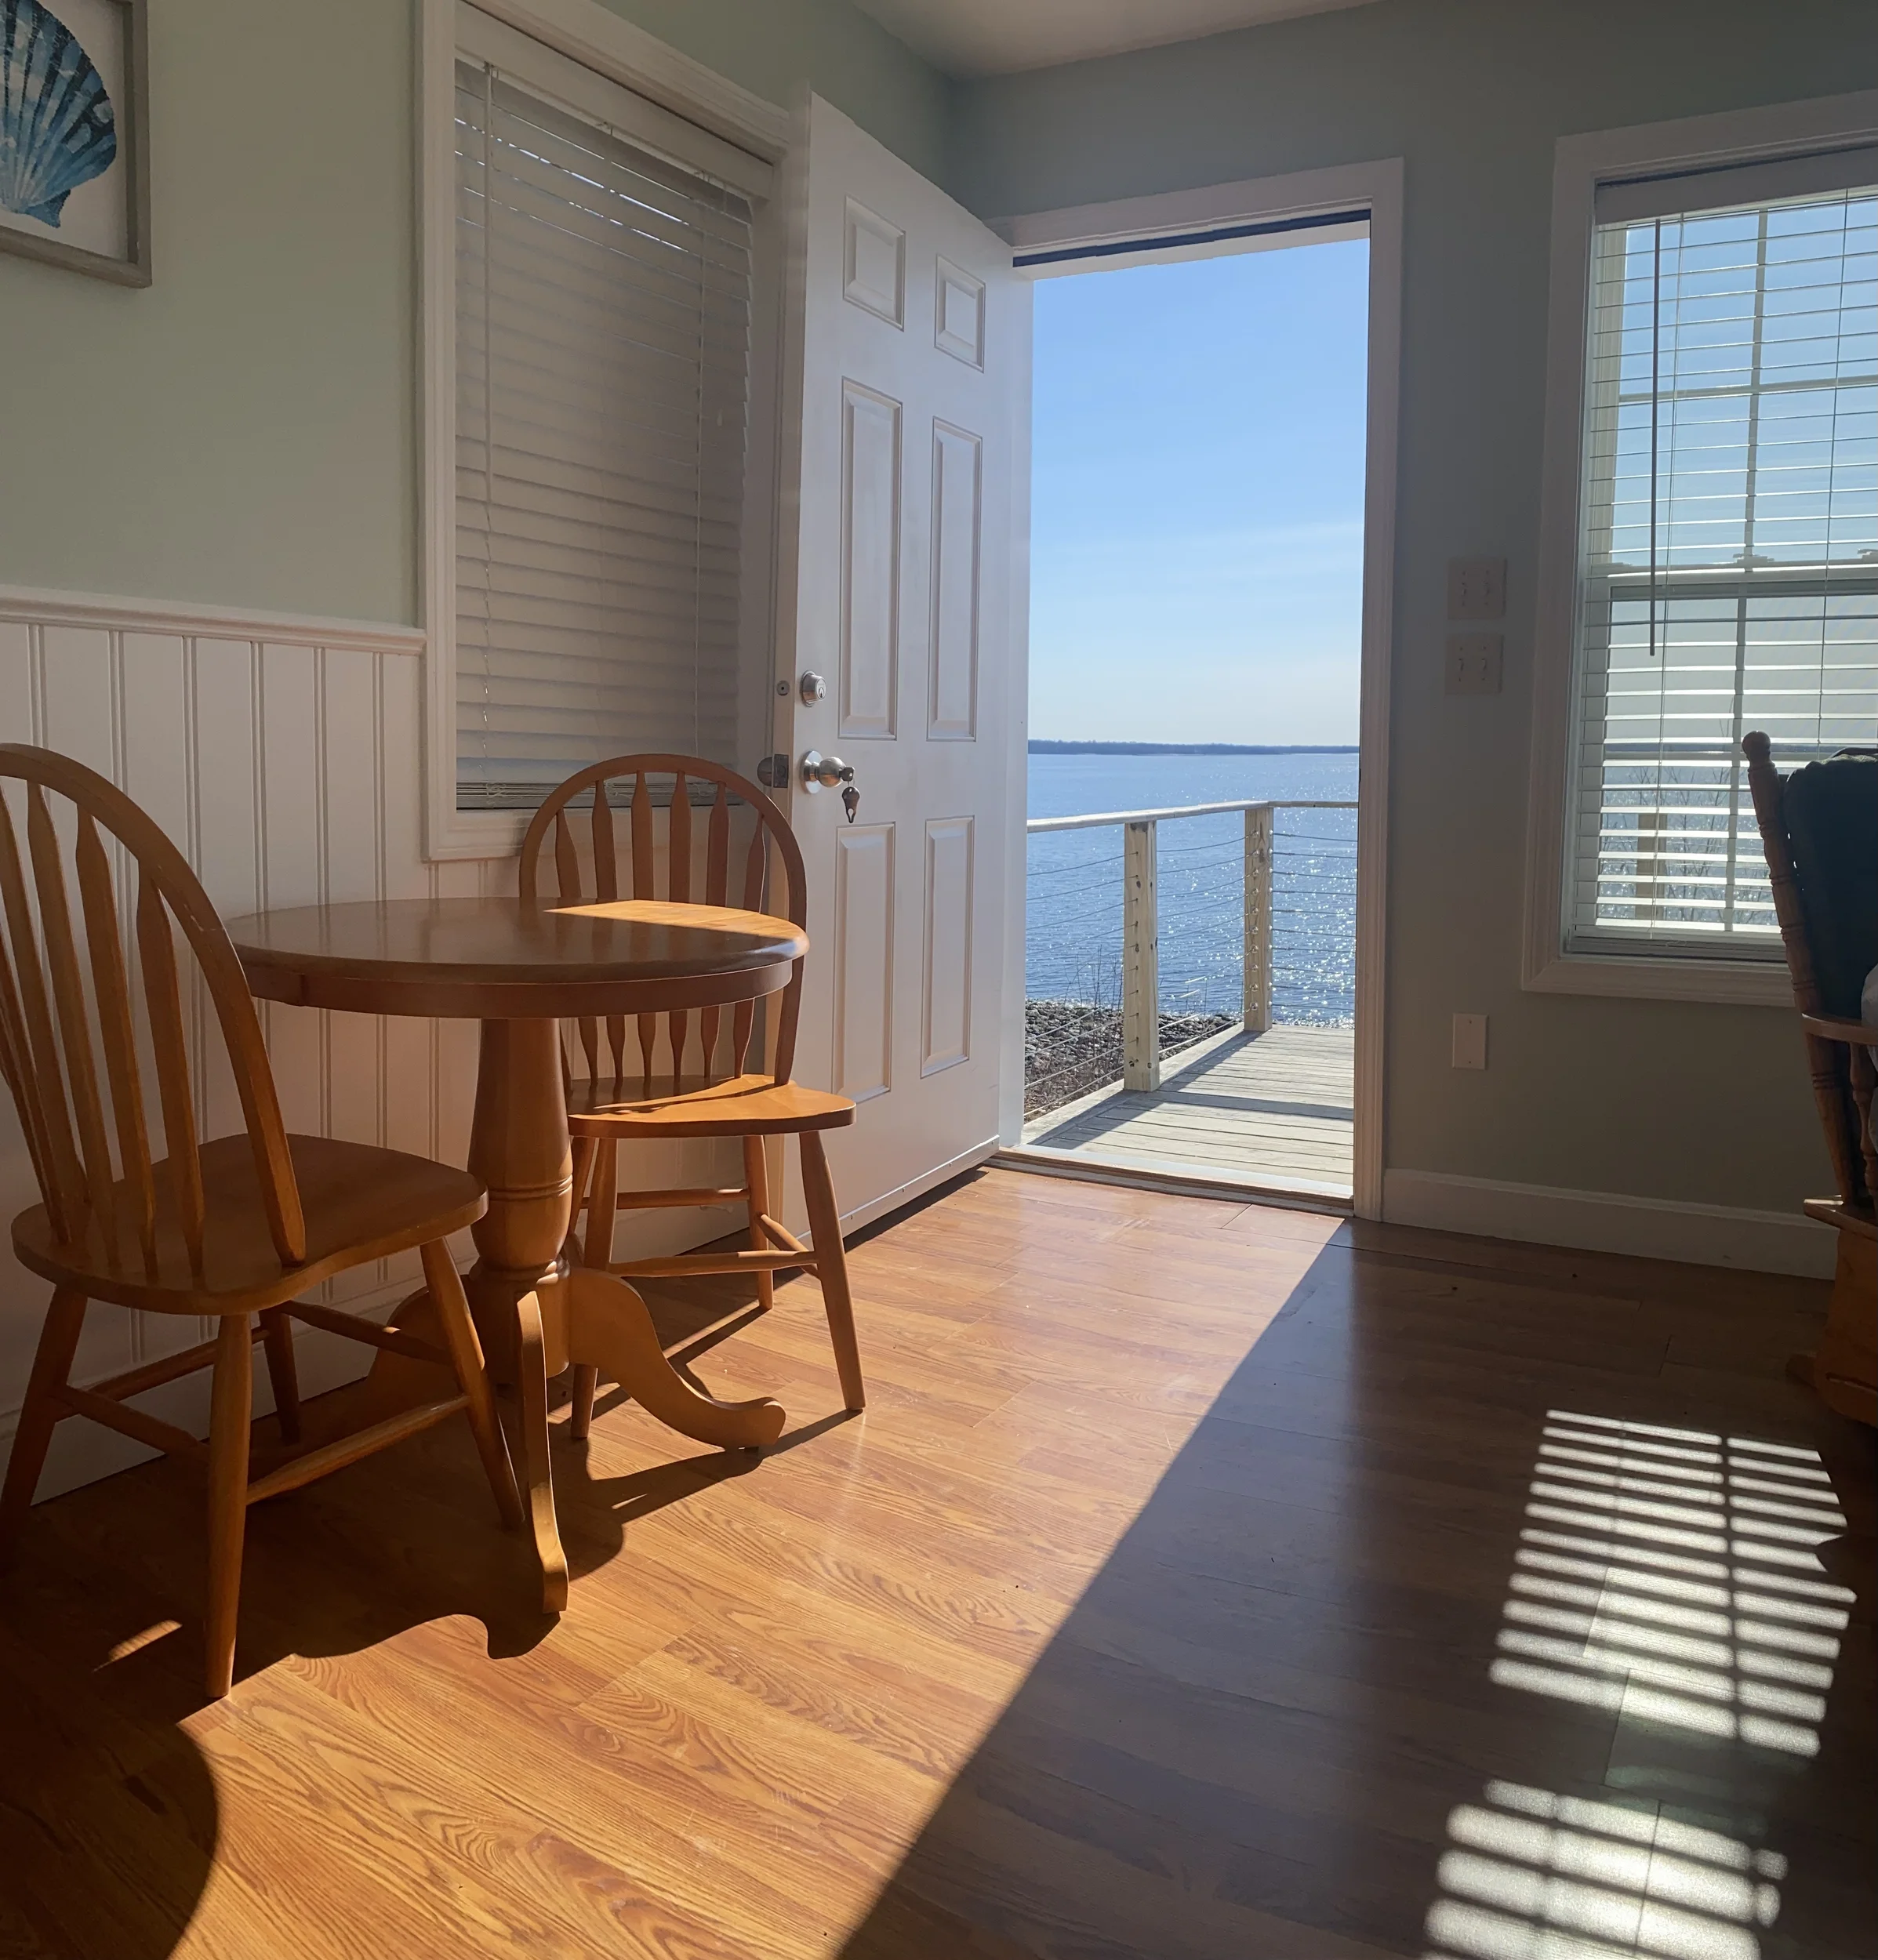 Why Stay at an Oceanfront Cottage?